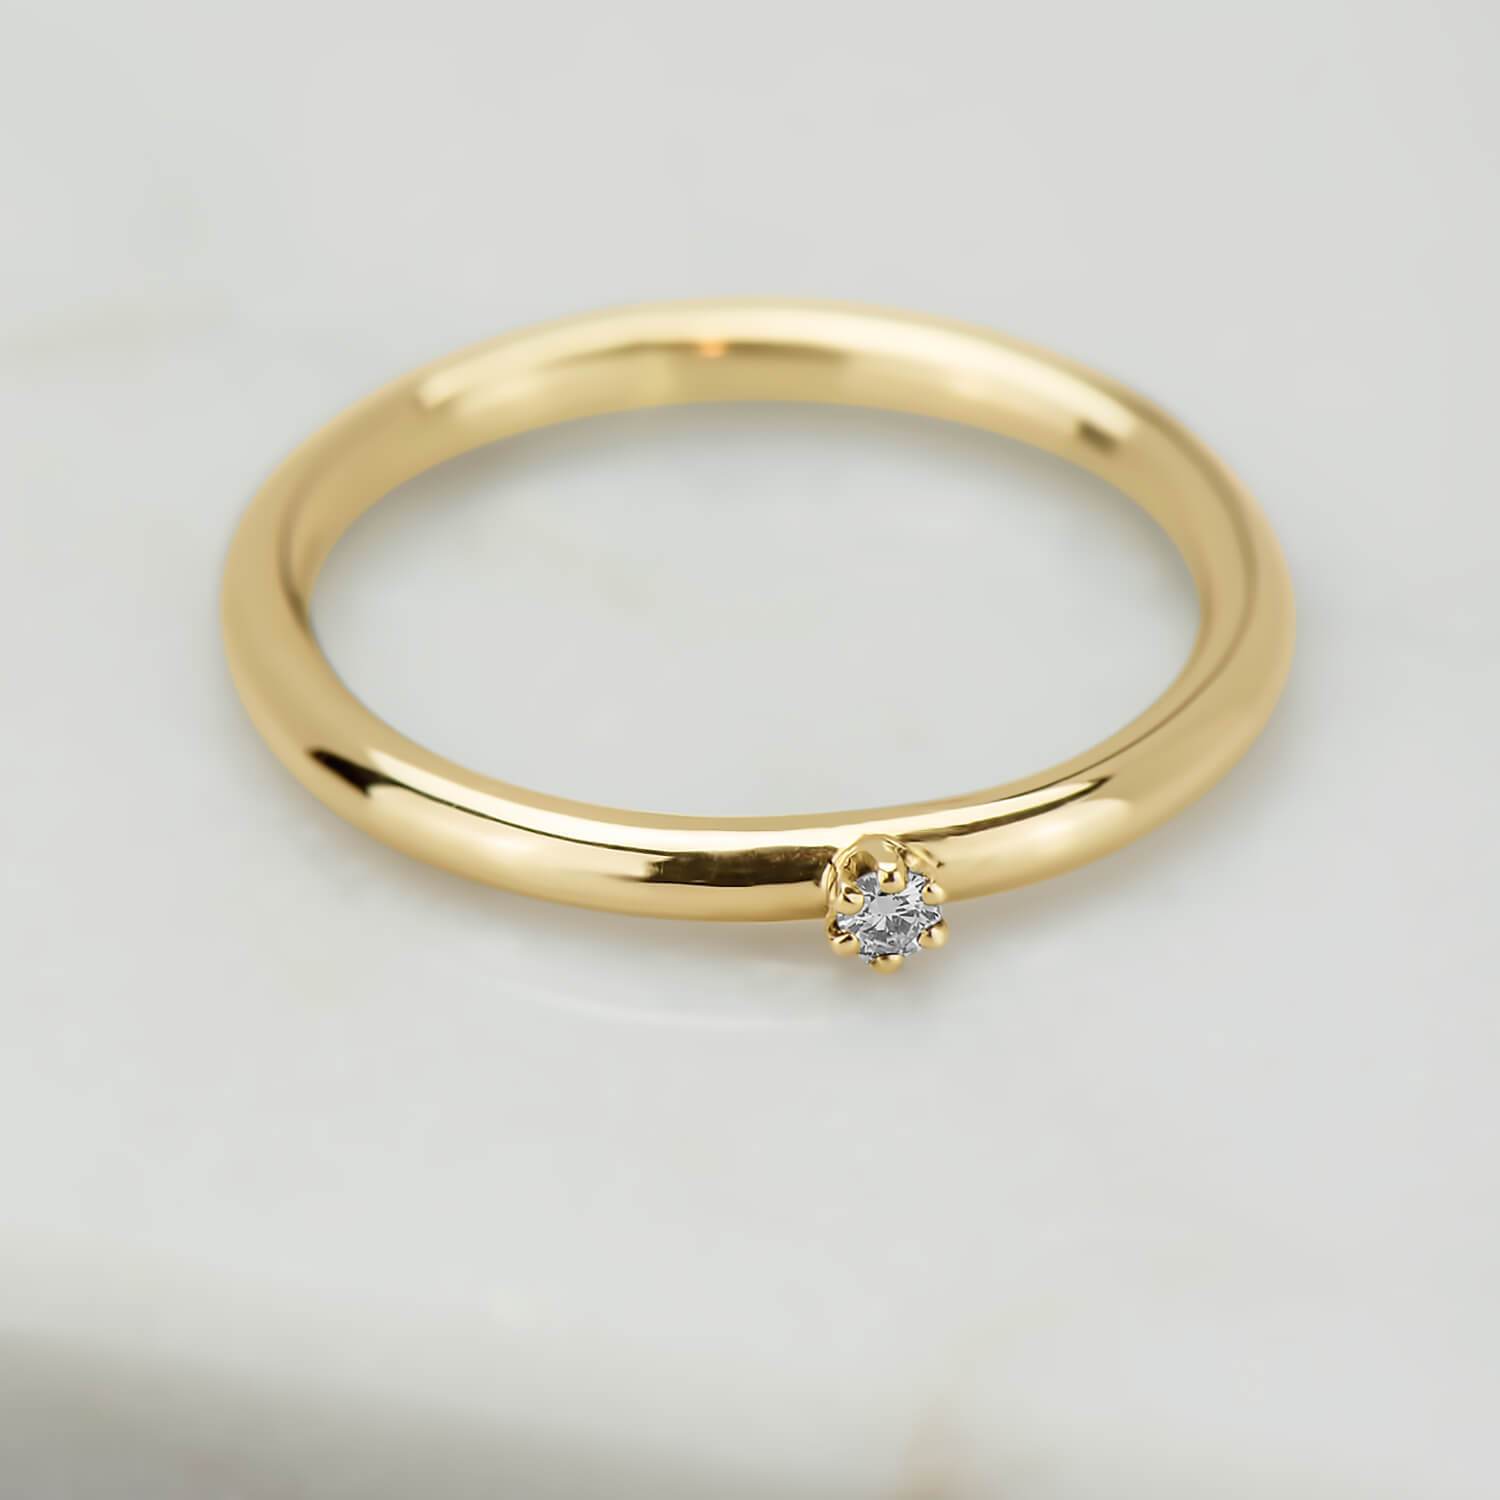 High polish 10 karat recycled yellow gold band, with a 2 millimetre natural clear diamond in a six prong setting.